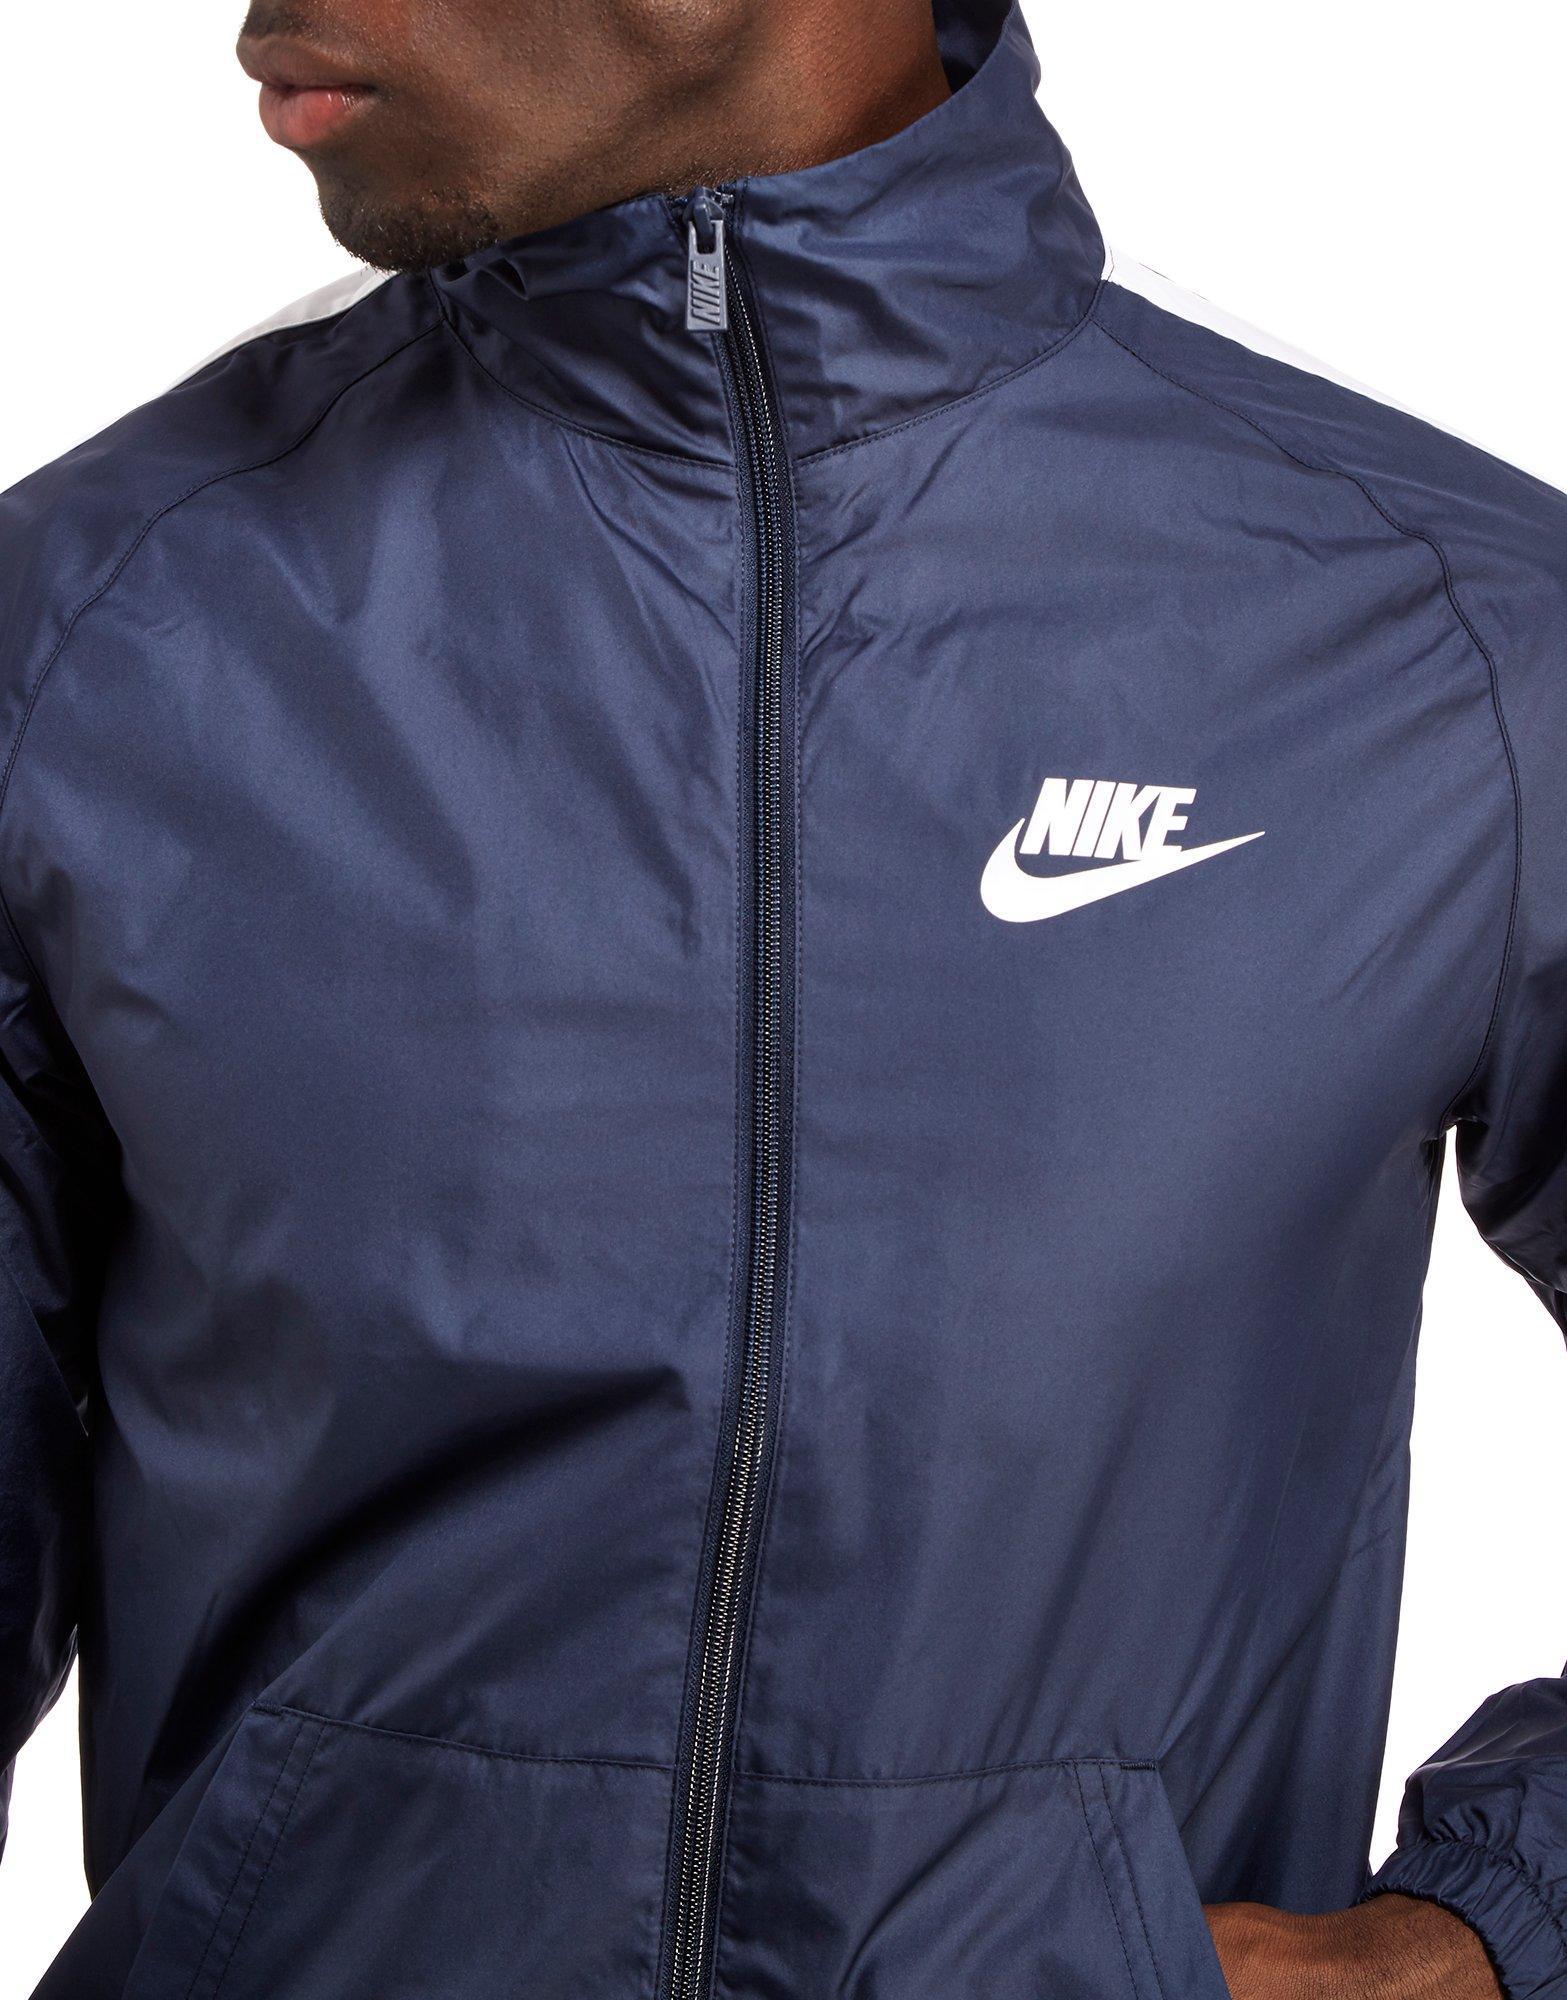 Nike Synthetic Season Woven Tracksuit in Navy/White (Blue) for Men - Lyst